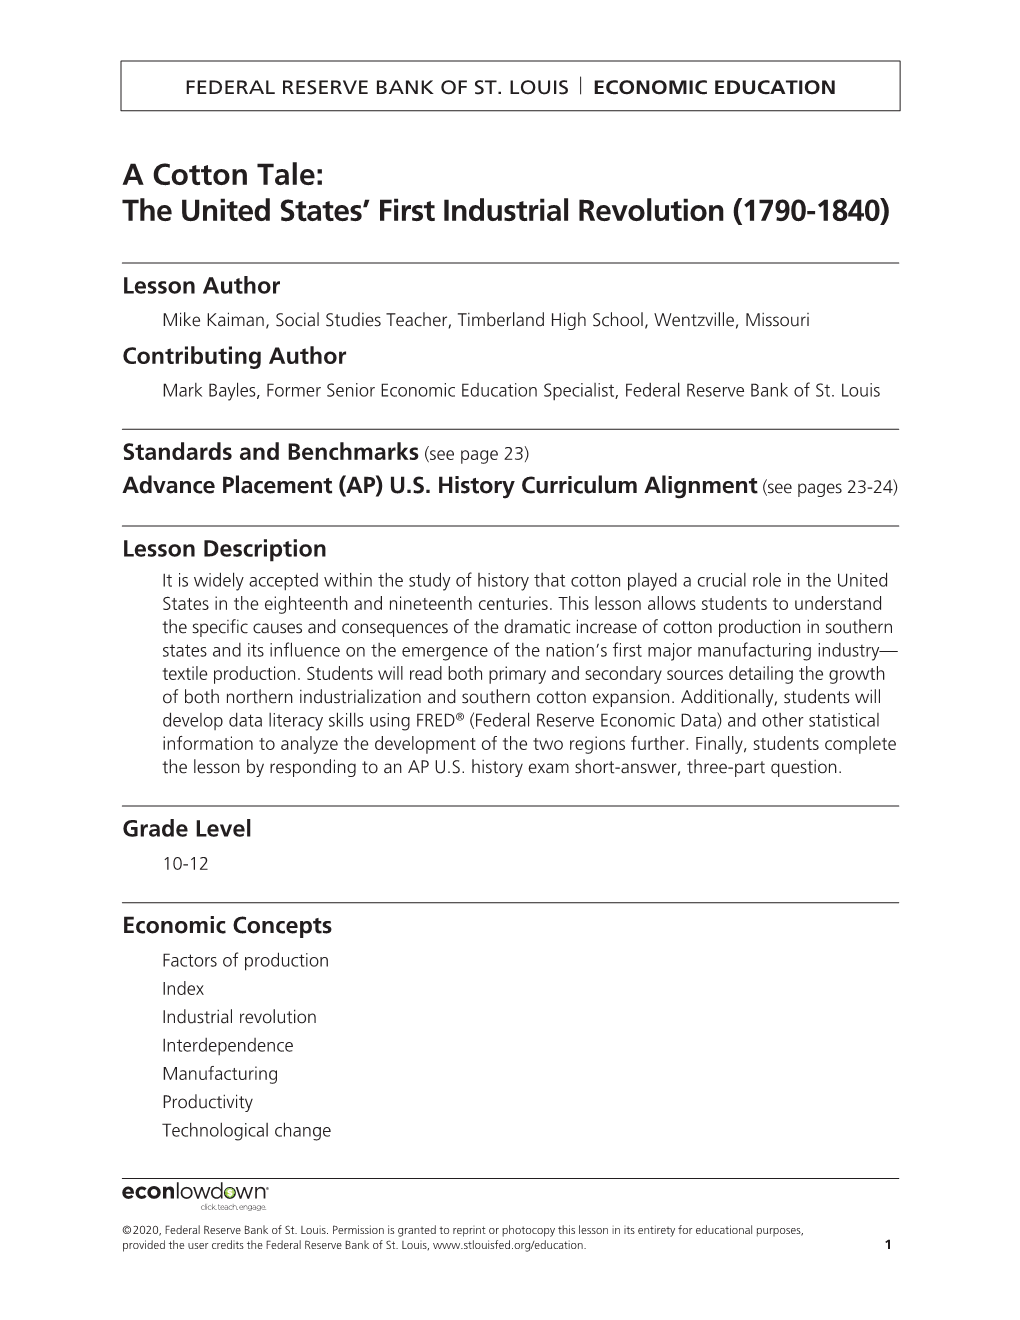 A Cotton Tale: the United States’ First Industrial Revolution (1790-1840)